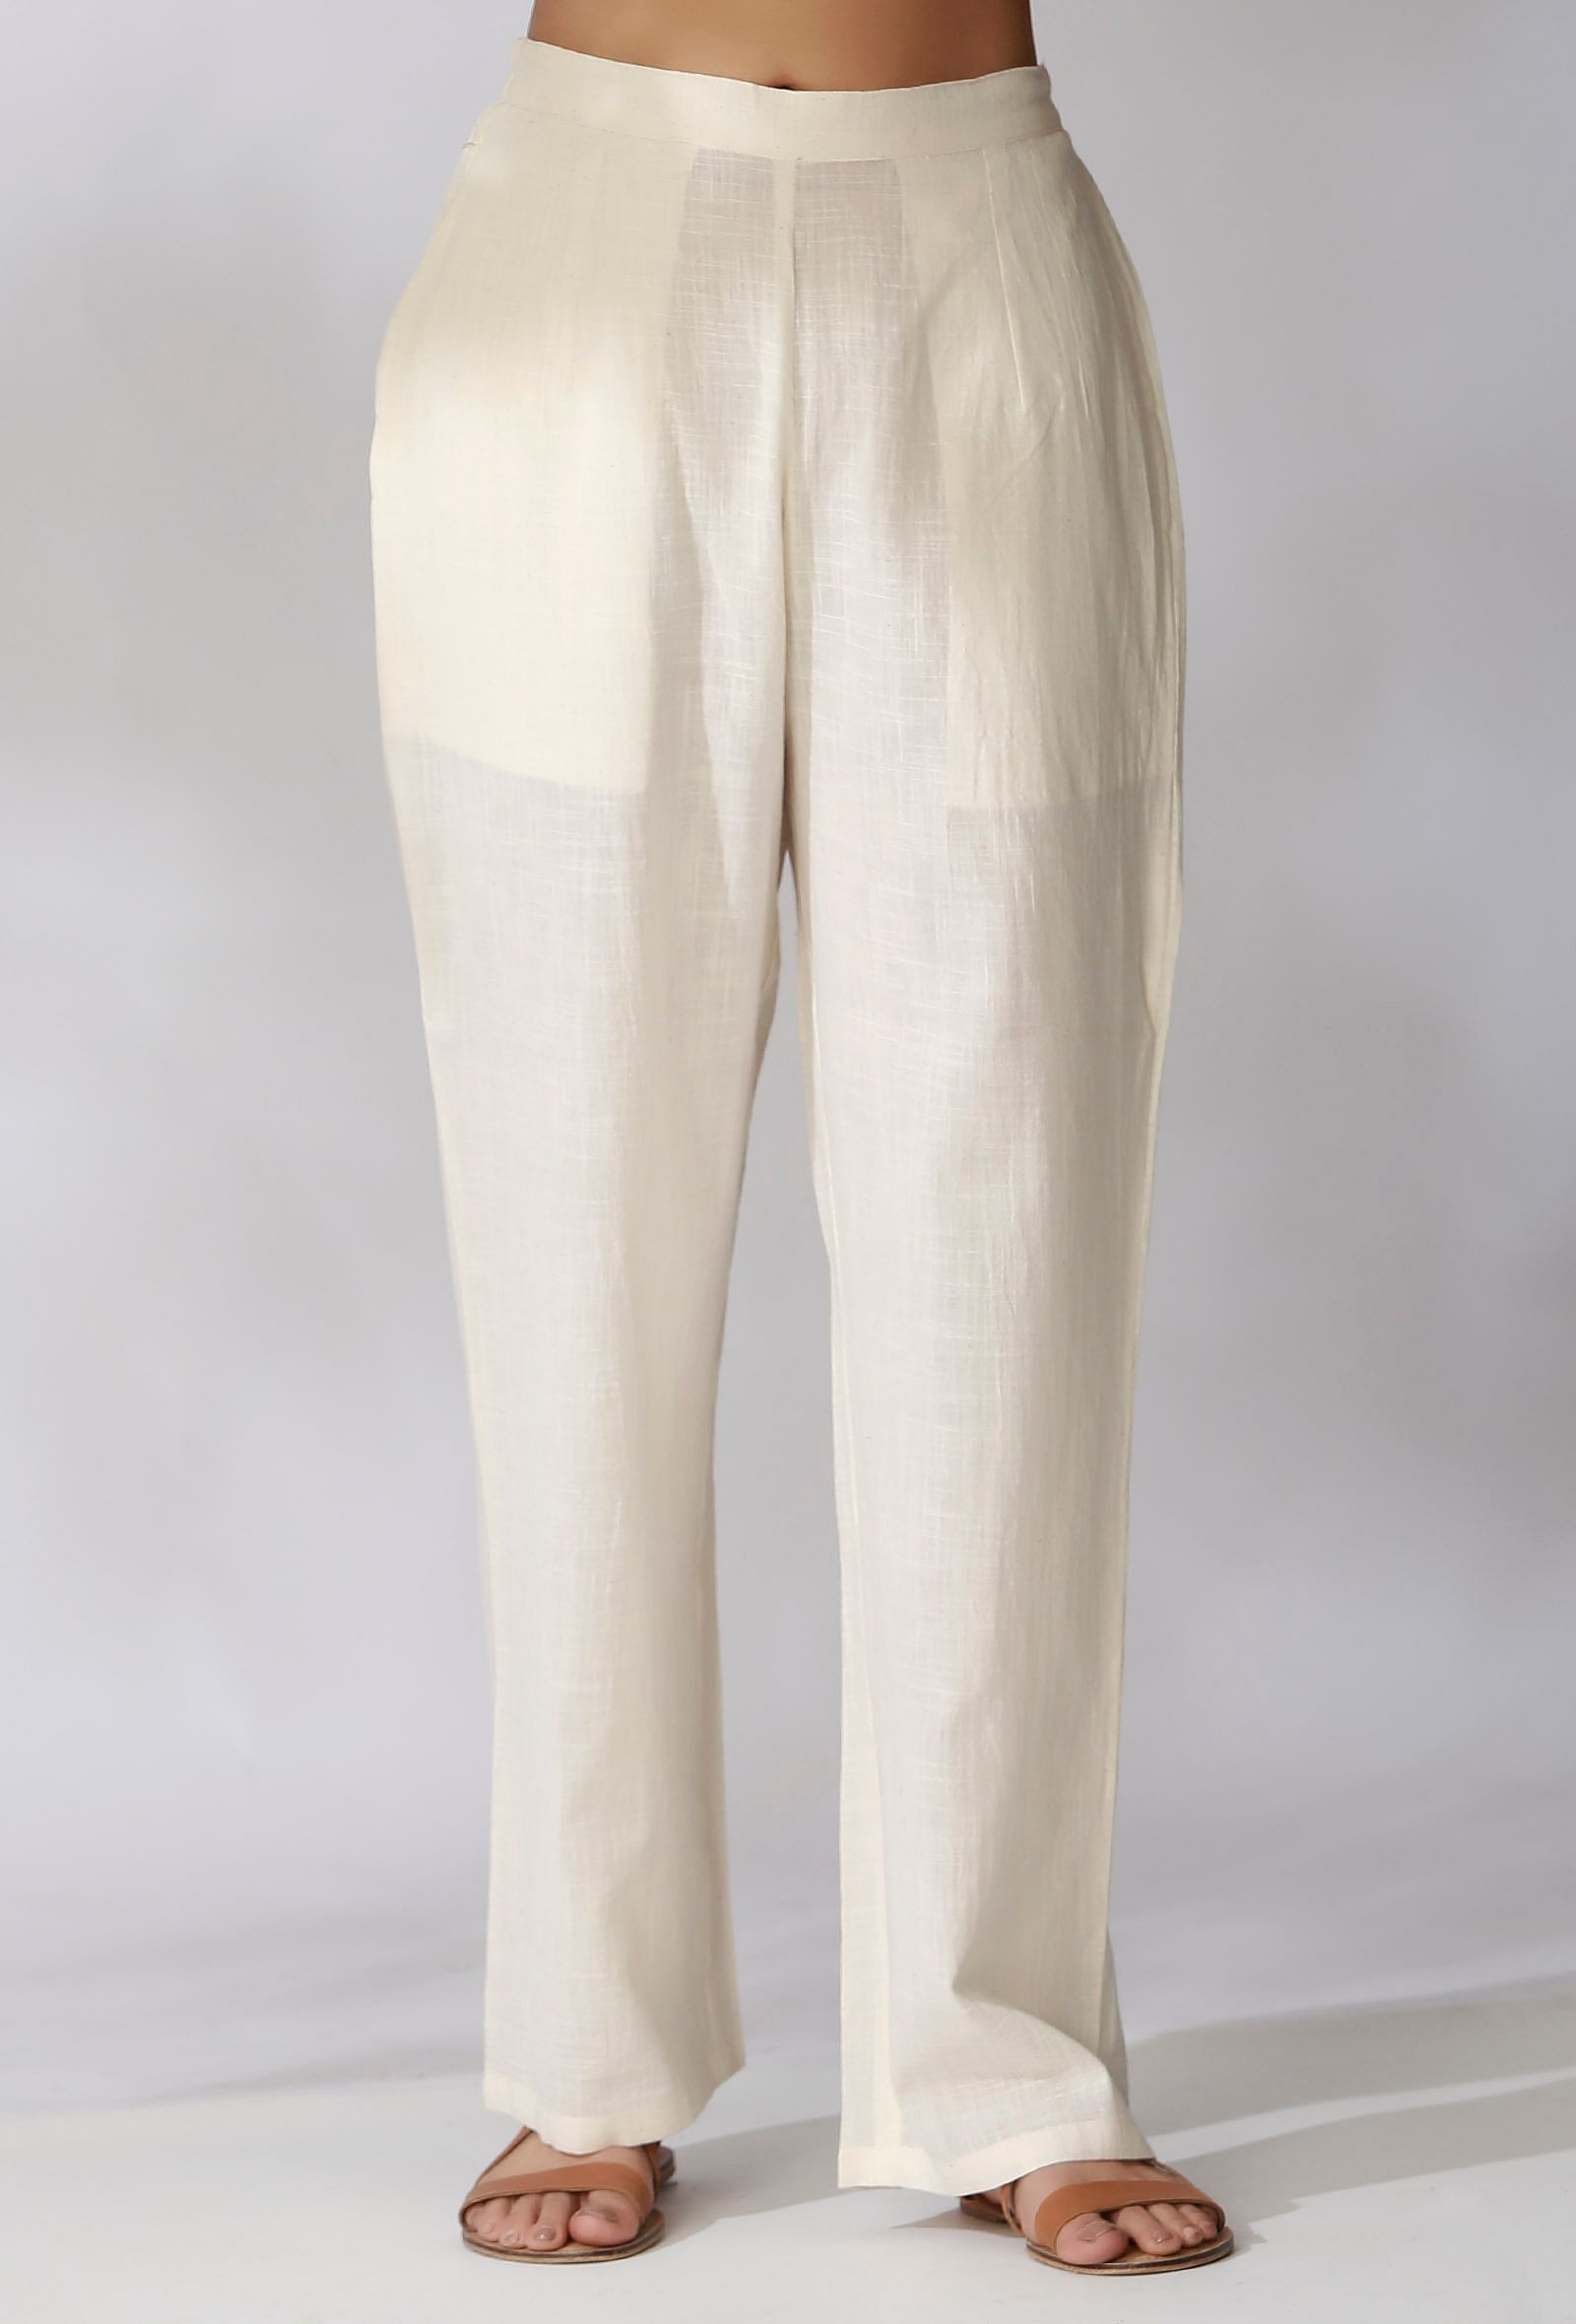 Men Slim Fit Cream Pure Cotton Trousers Price in India Full Specifications   Offers  DTashioncom